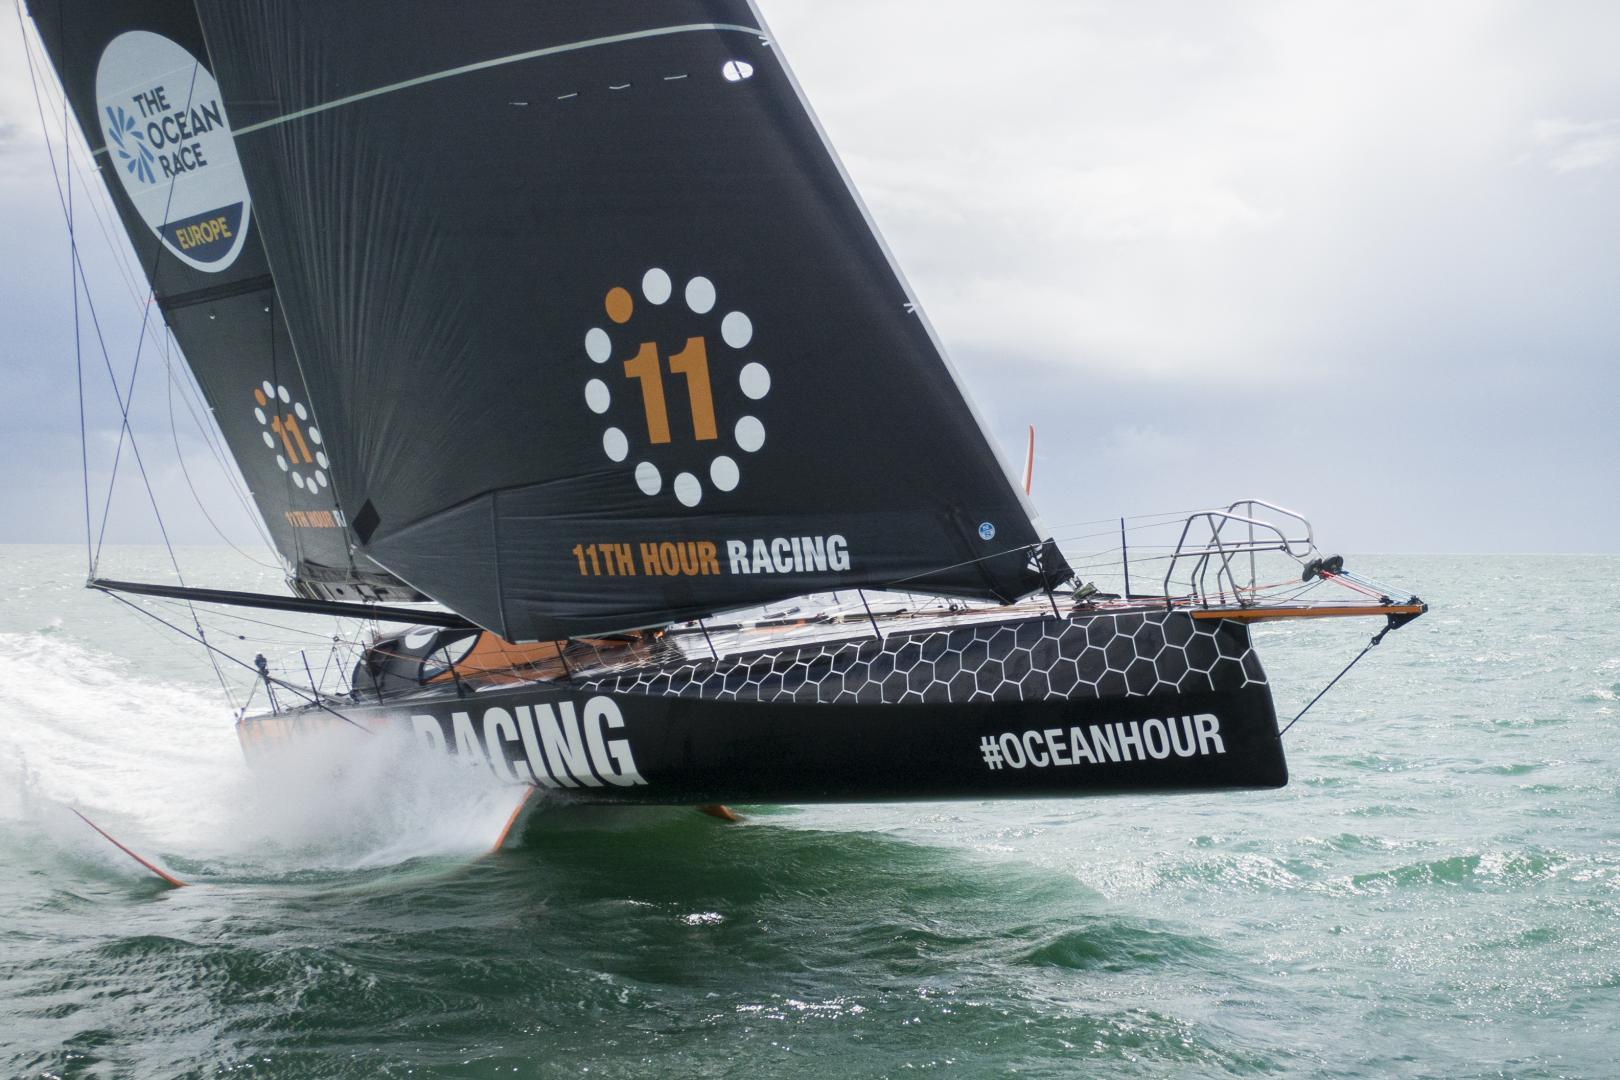 May 22, 2021. 11th Hour Racing Team sailing in Concarneau, France in the lead up to the start of The Ocean Race Europe.